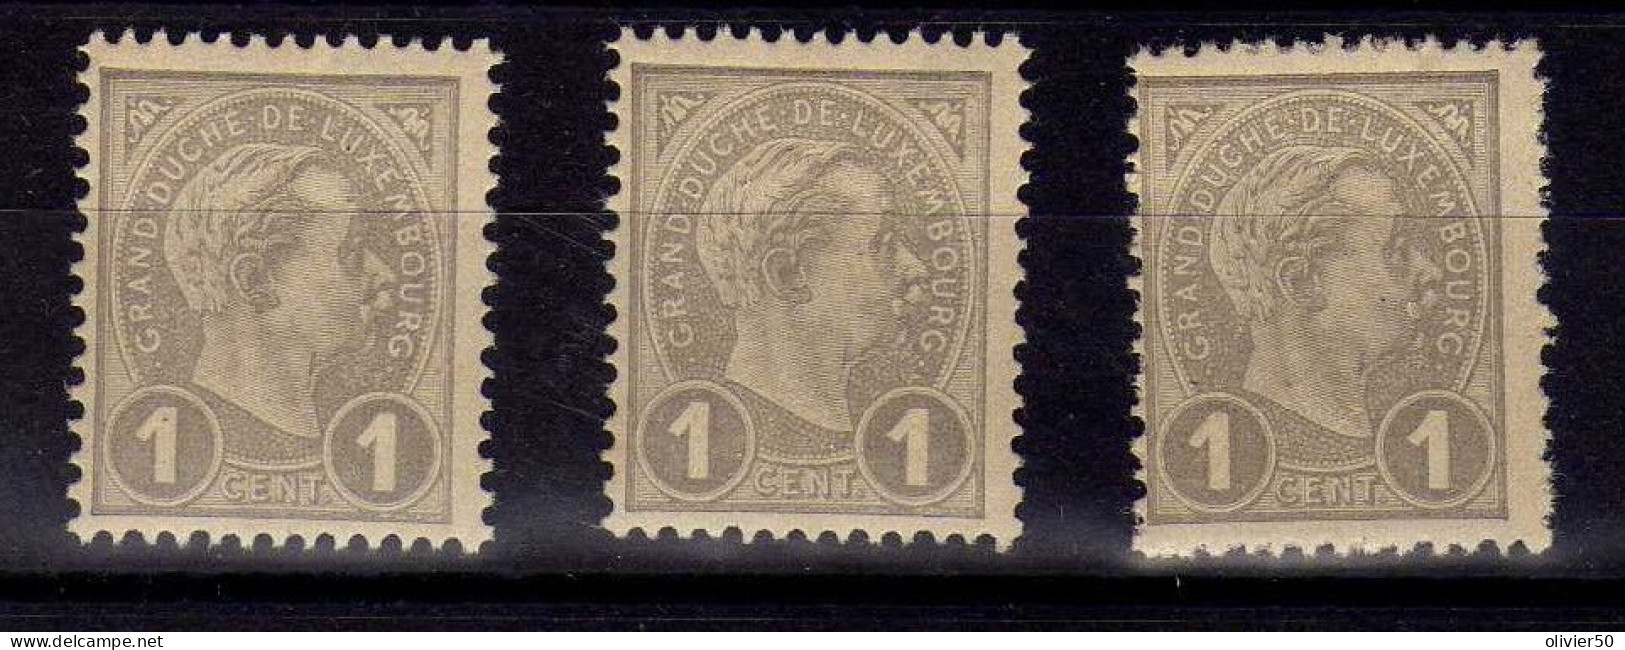 Luxembourg (1895) - 1 C. Grand-Duc Adolphe Neufs** - MNH - 1895 Adolphe Right-hand Side